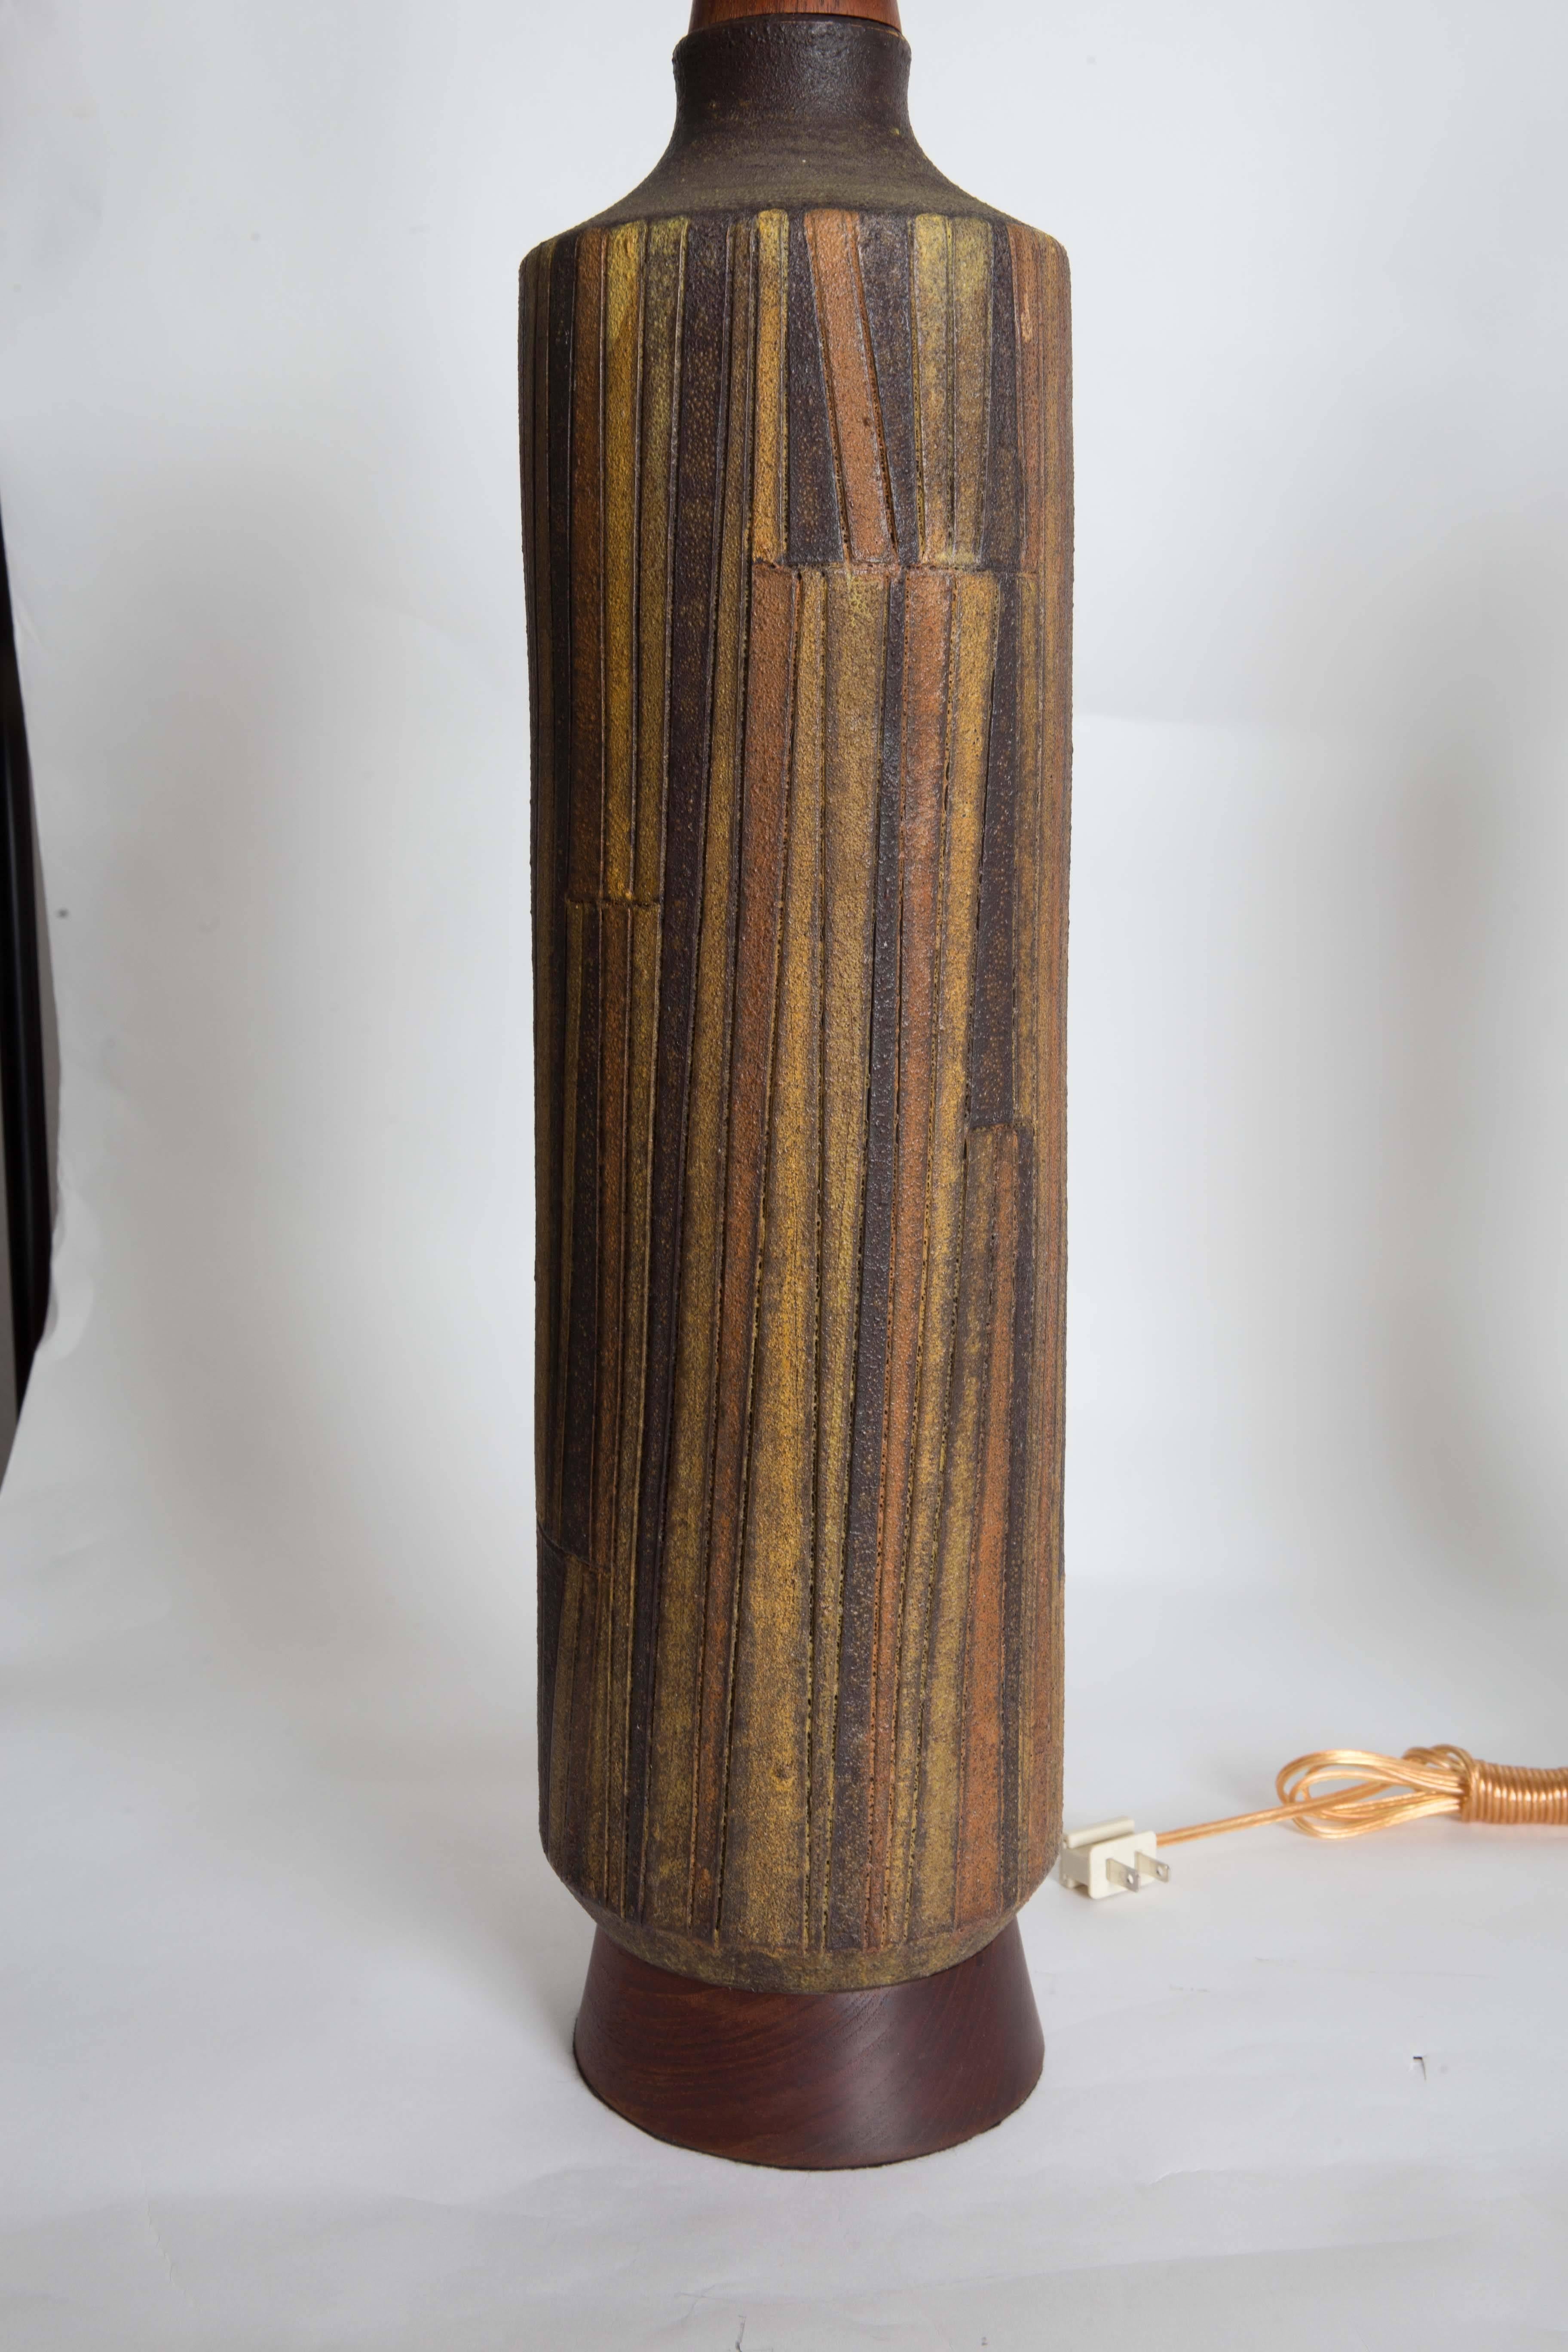 Pair of Columnar Multicolored Ceramic and Wood Lamps by Raymor 1